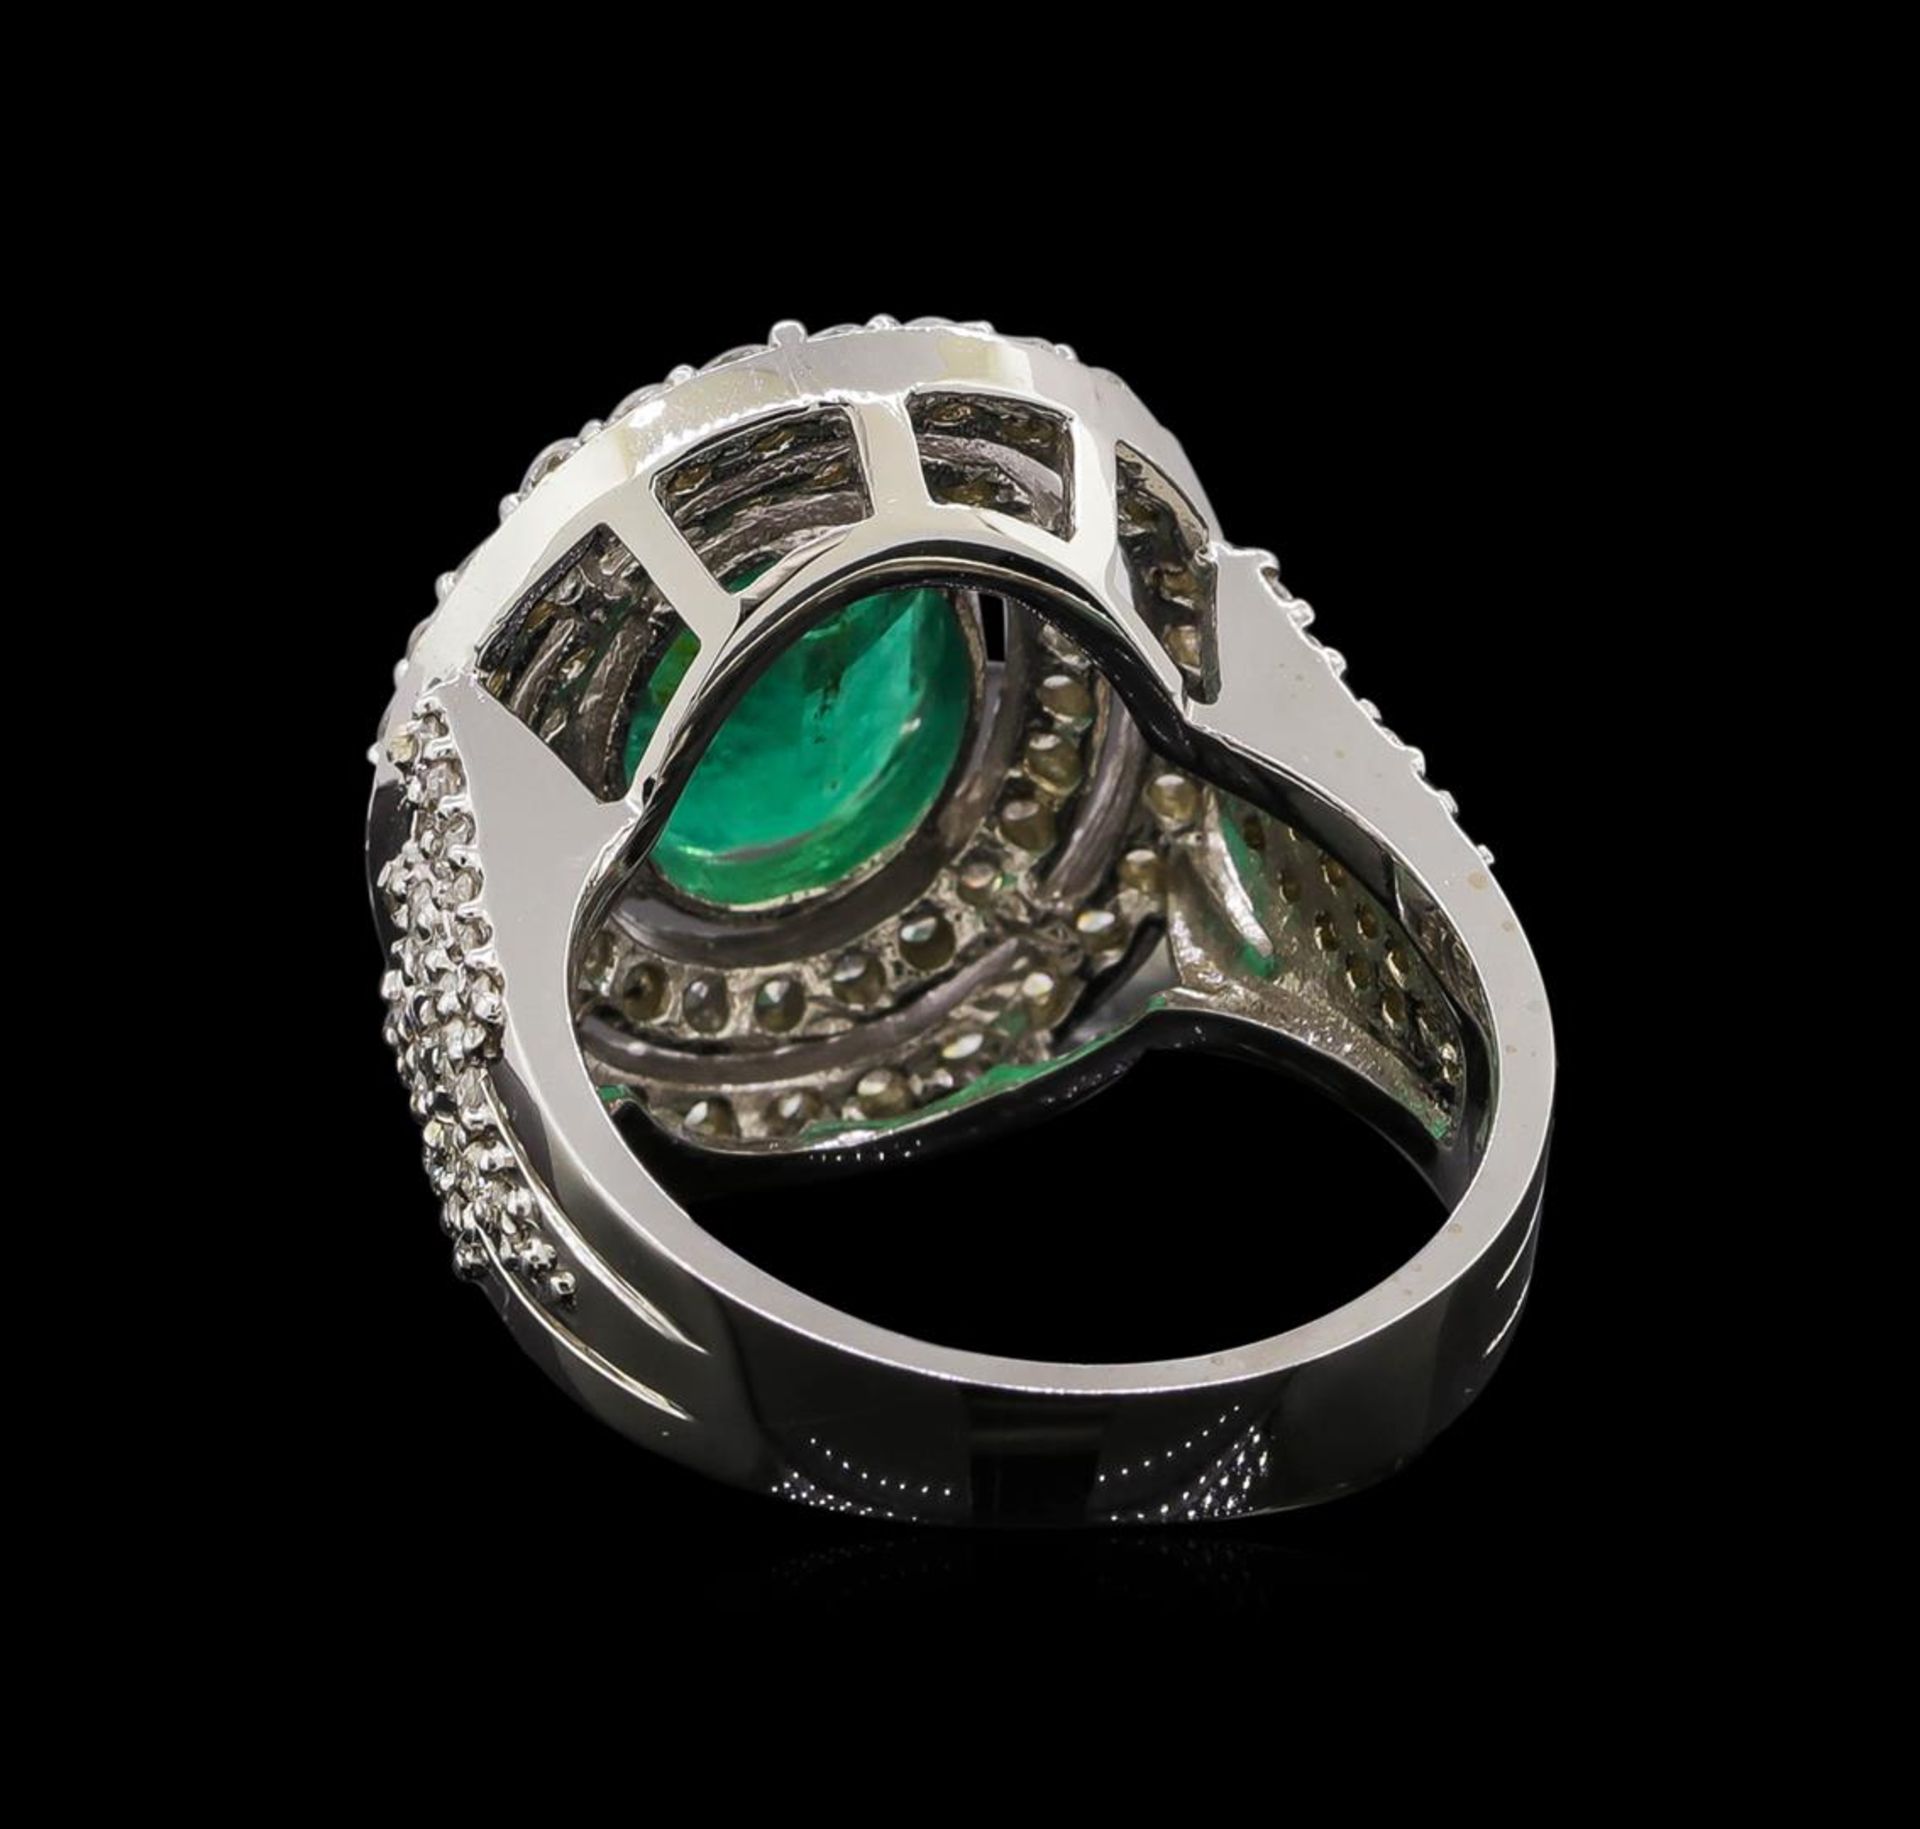 14KT White Gold 3.58 ctw Emerald and Diamond Ring - Image 3 of 5